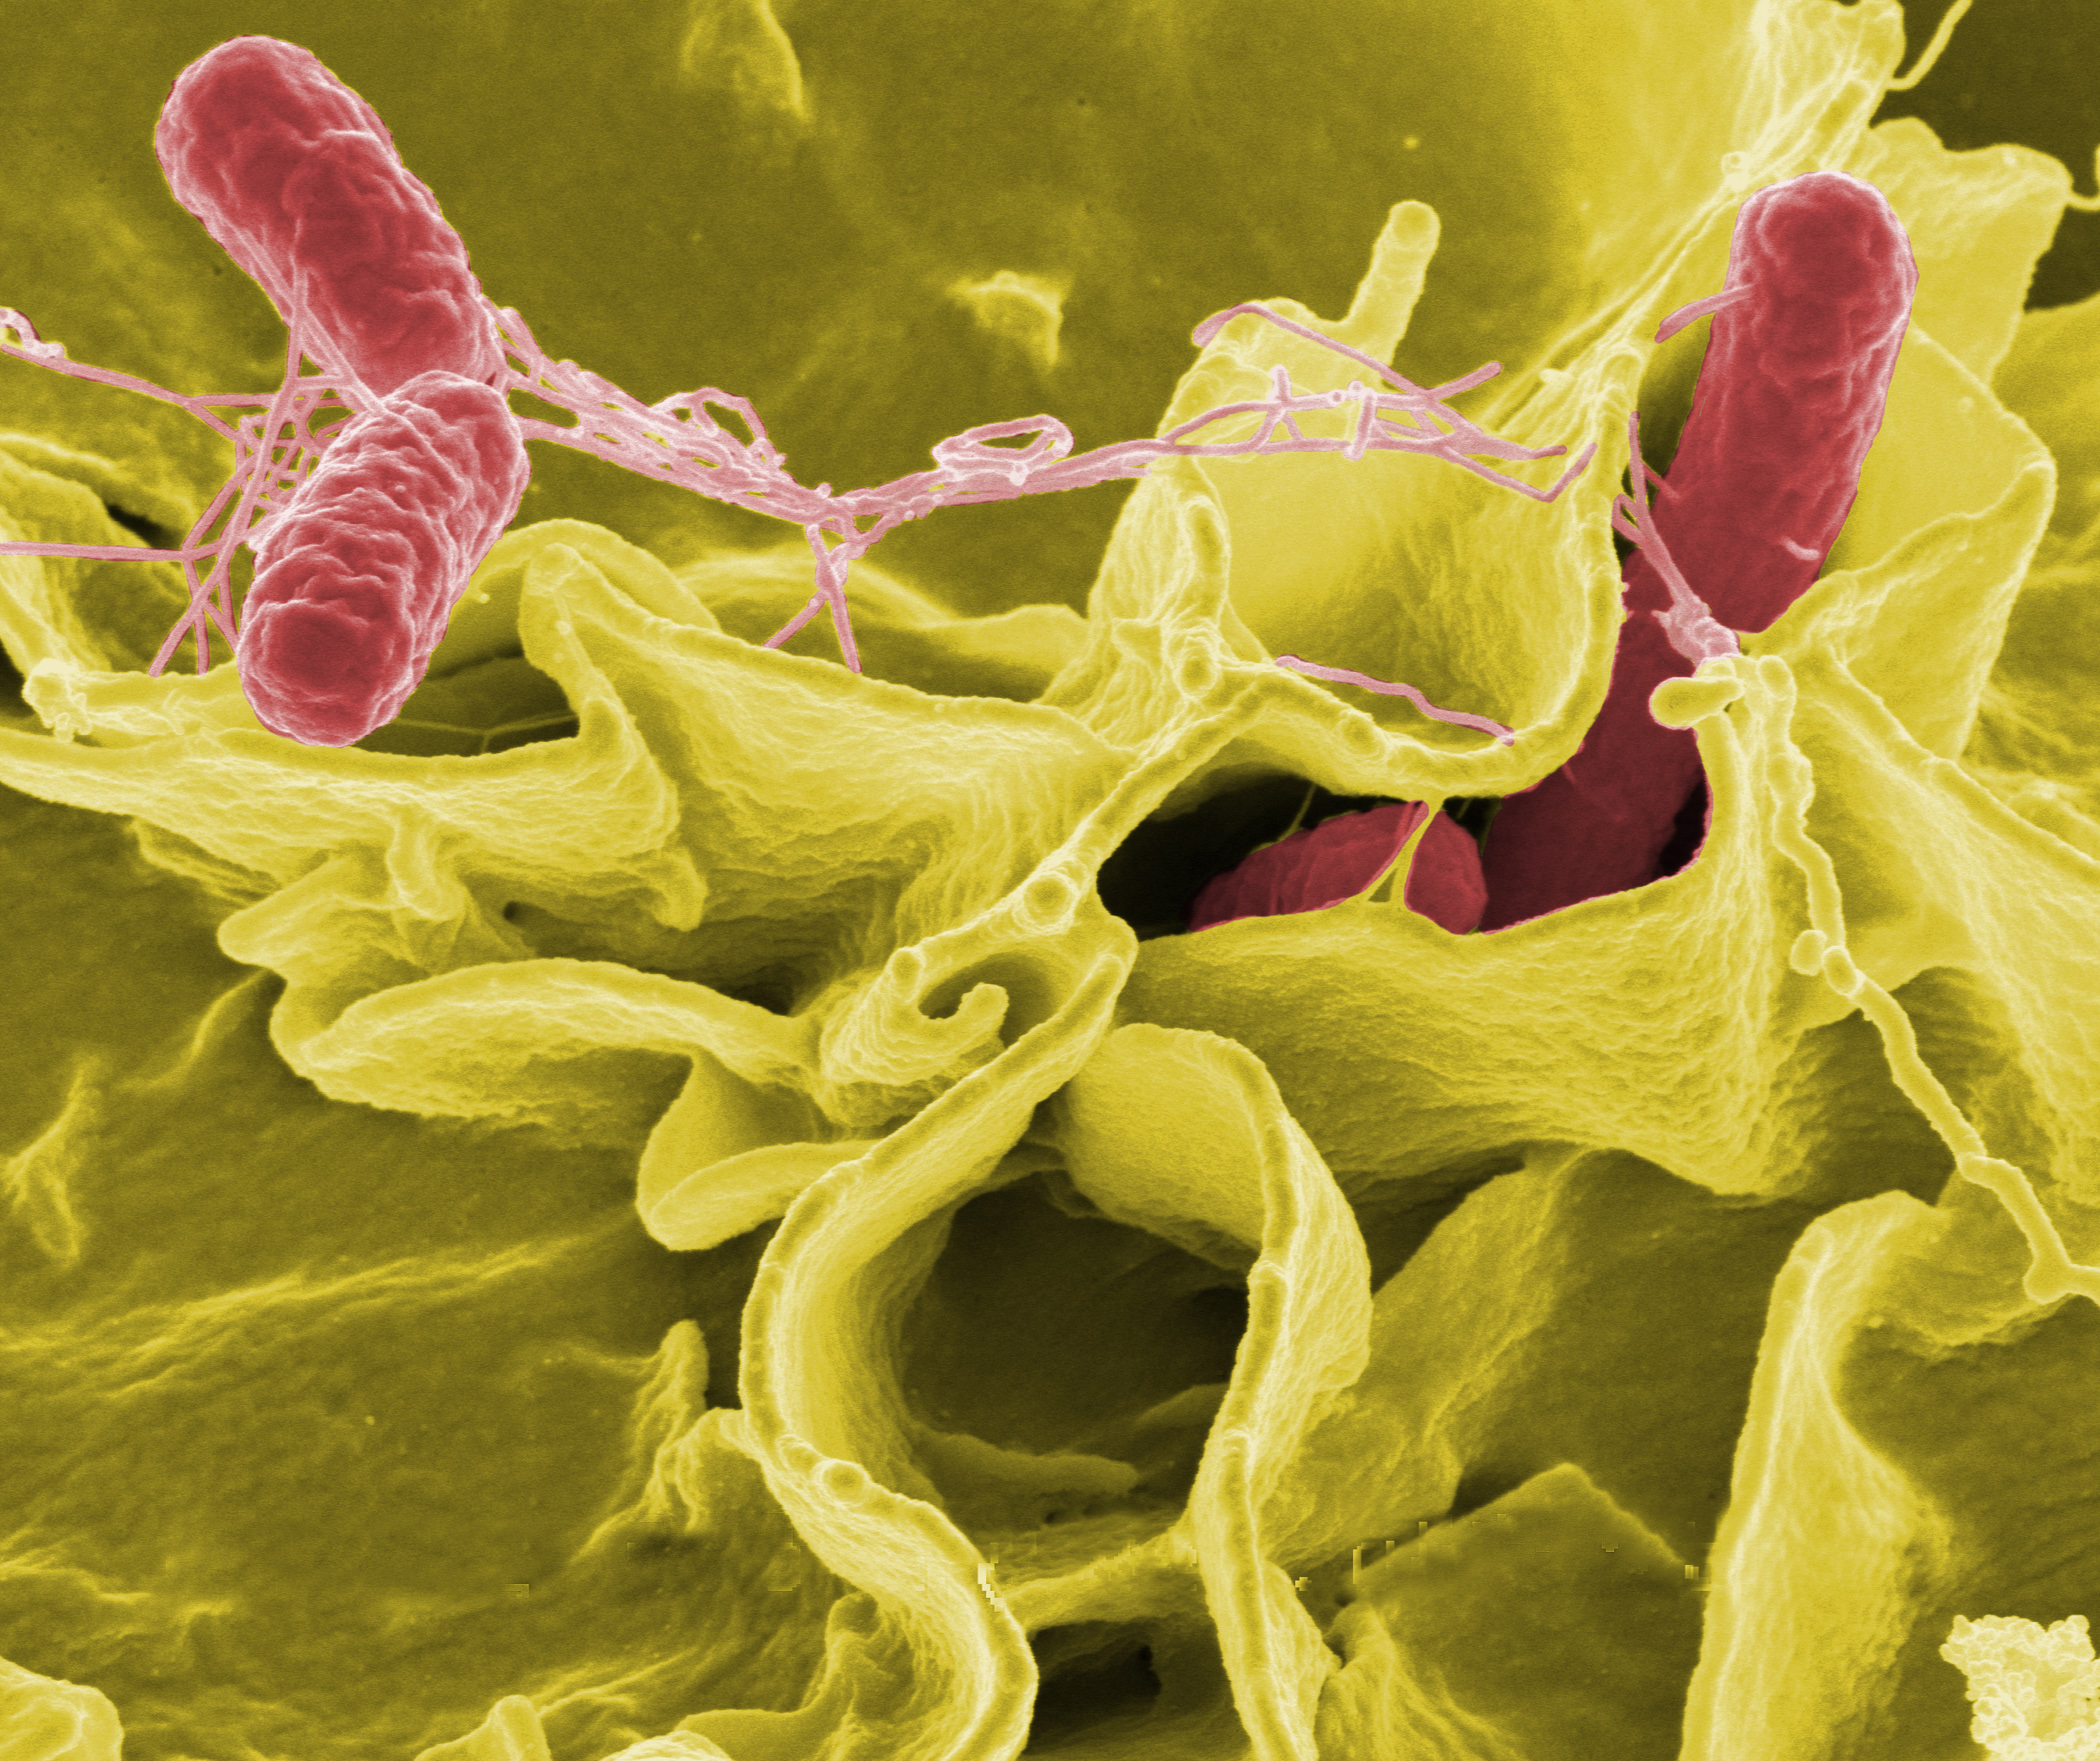 Warmer Temperatures Could Mean More Salmonella Outbreaks